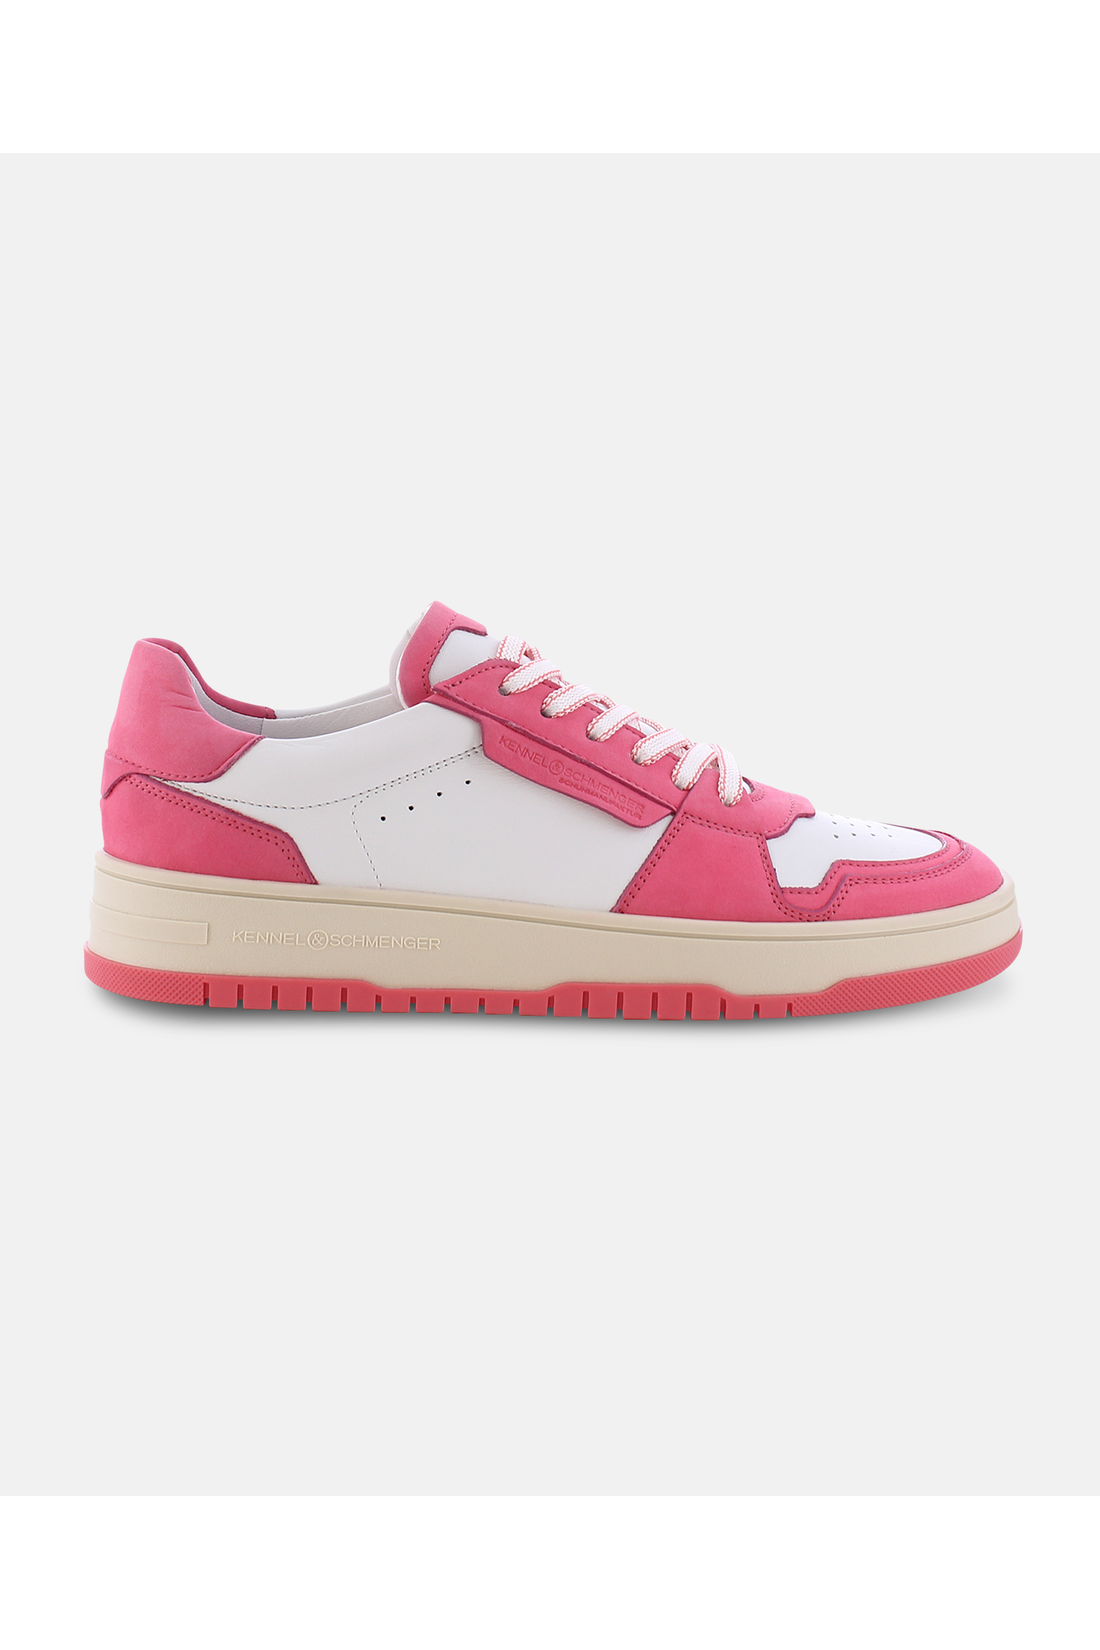 Kennel-Schmenger-OUTLET-SALE-DRIFT-Sneakers-ARCHIVE-COLLECTION-3.png